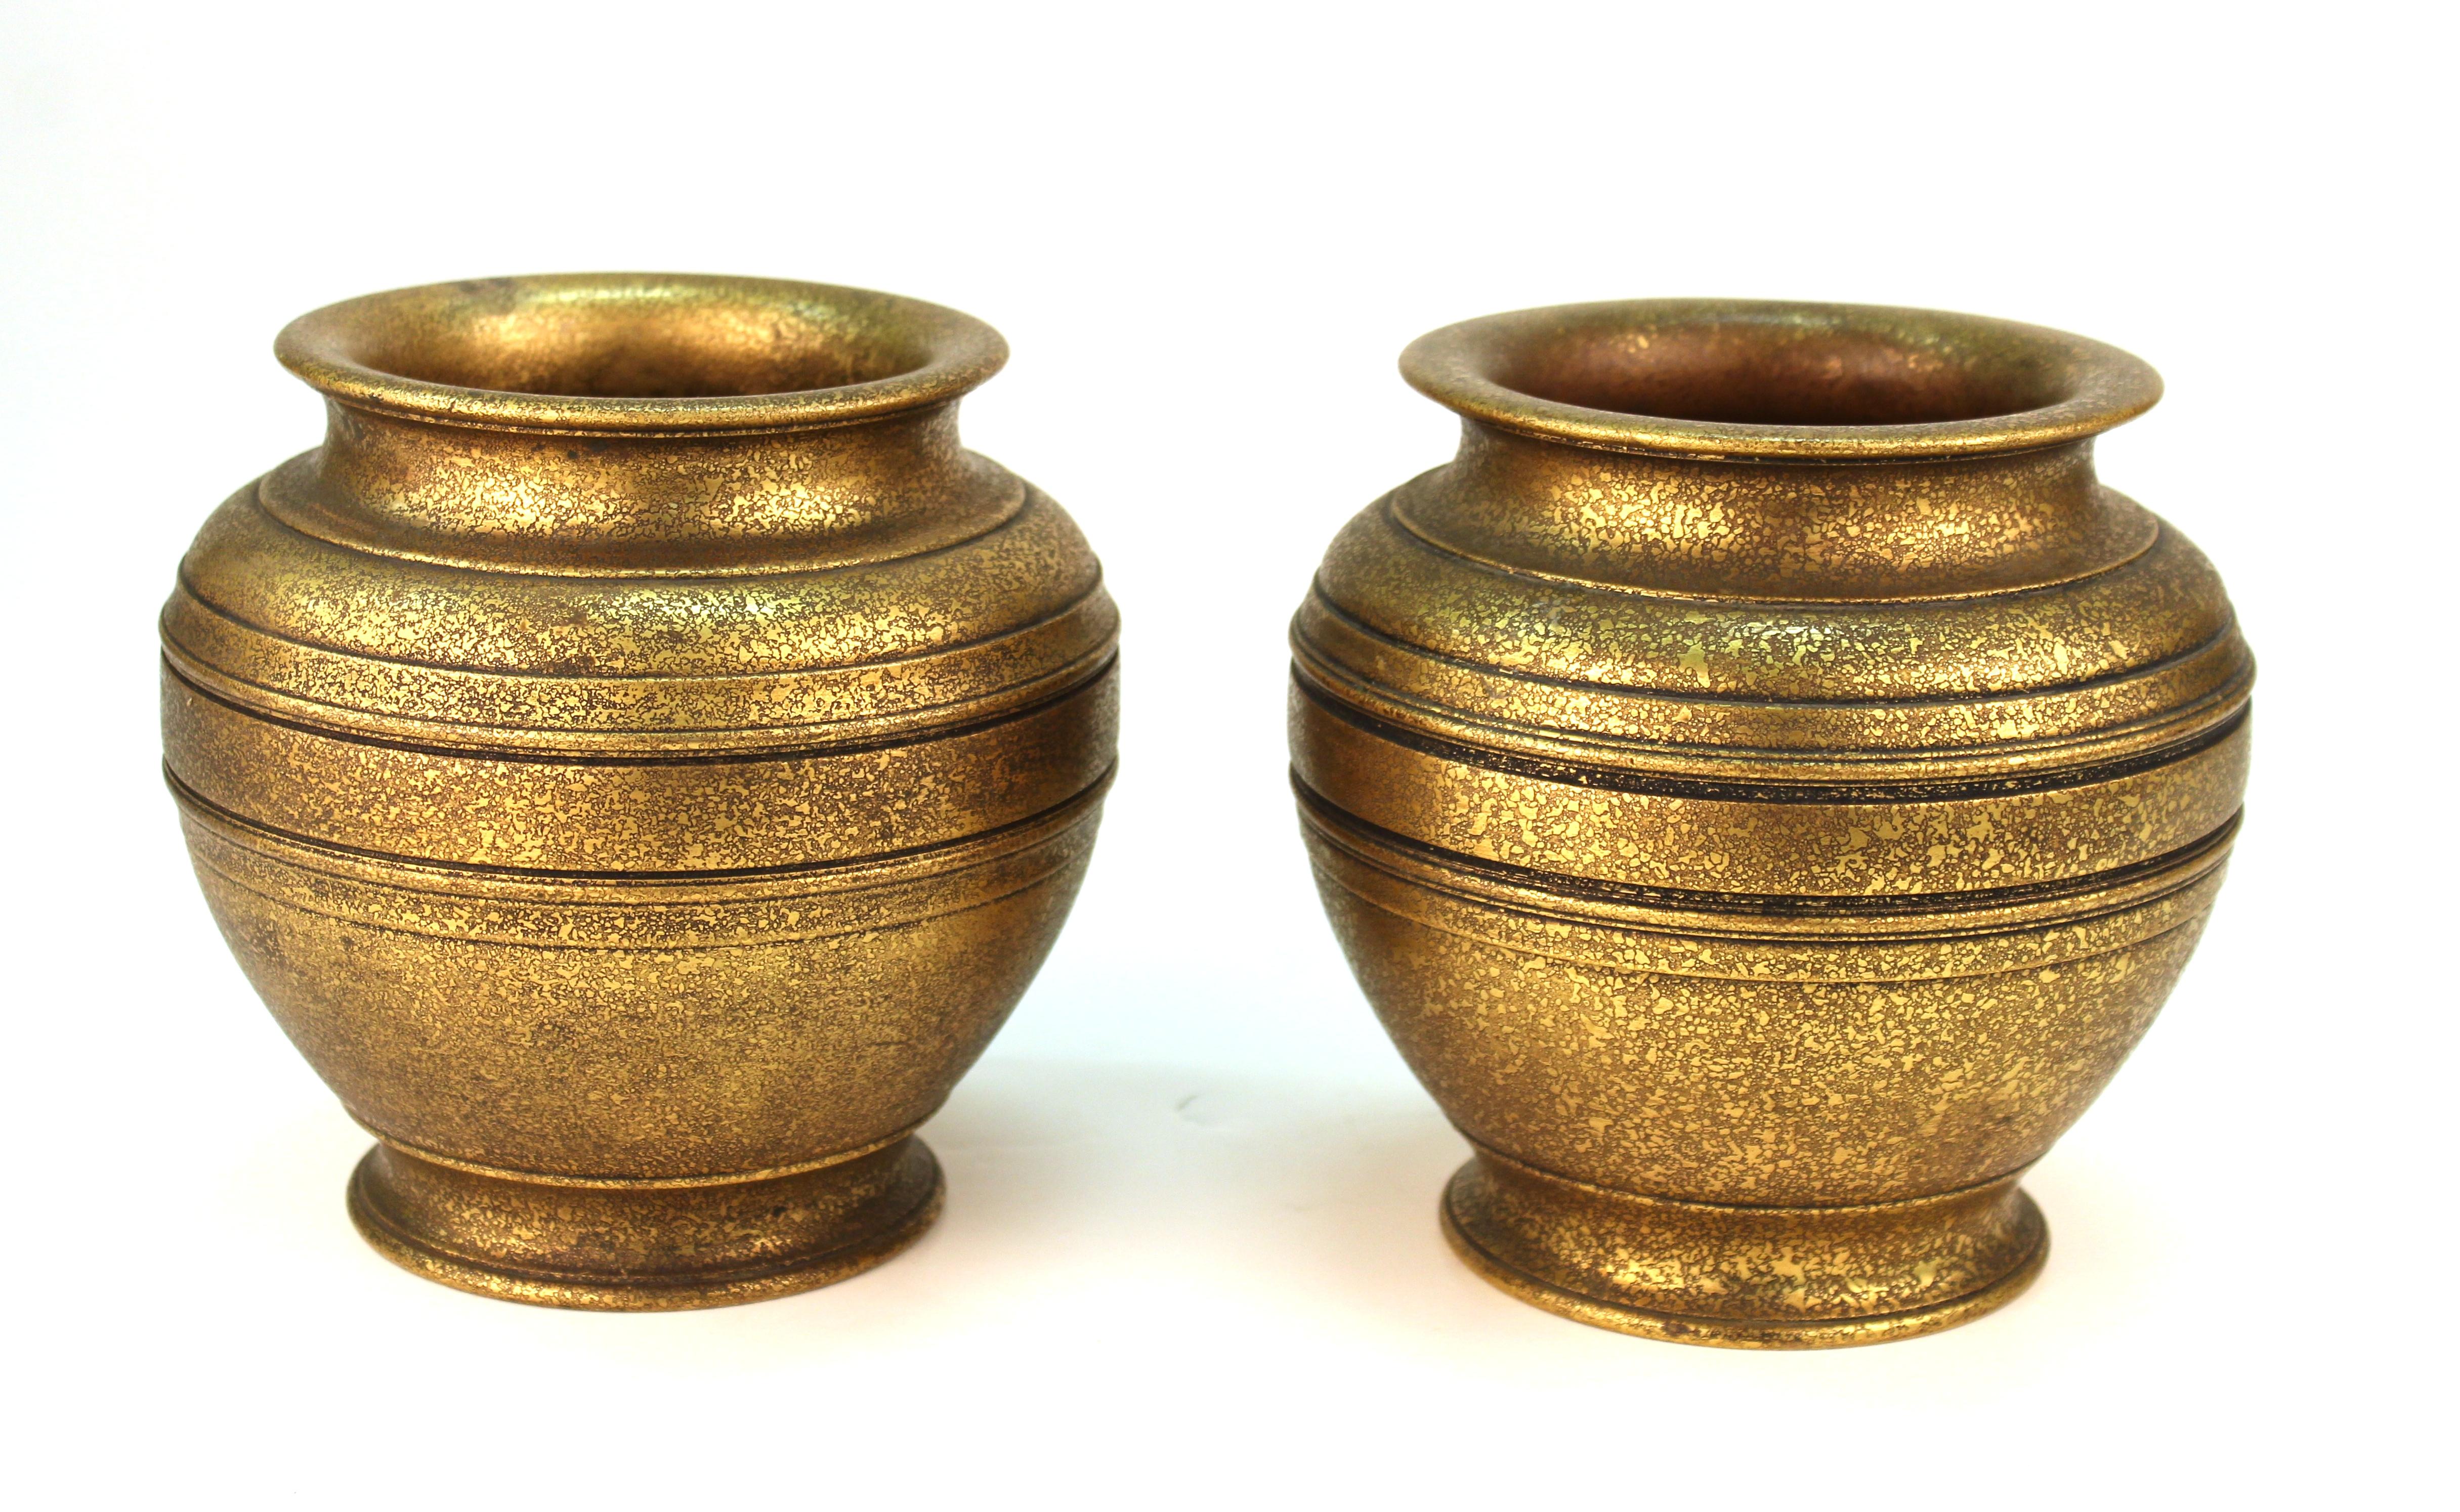 American gilded age period pair of Tiffany urns made in heavy cast gilt bronze. This rare pair was made in the Tiffany Studios in New York City during the 1900s-1910s, one of them having a darker brown patina. Both are stamped on the bottom 